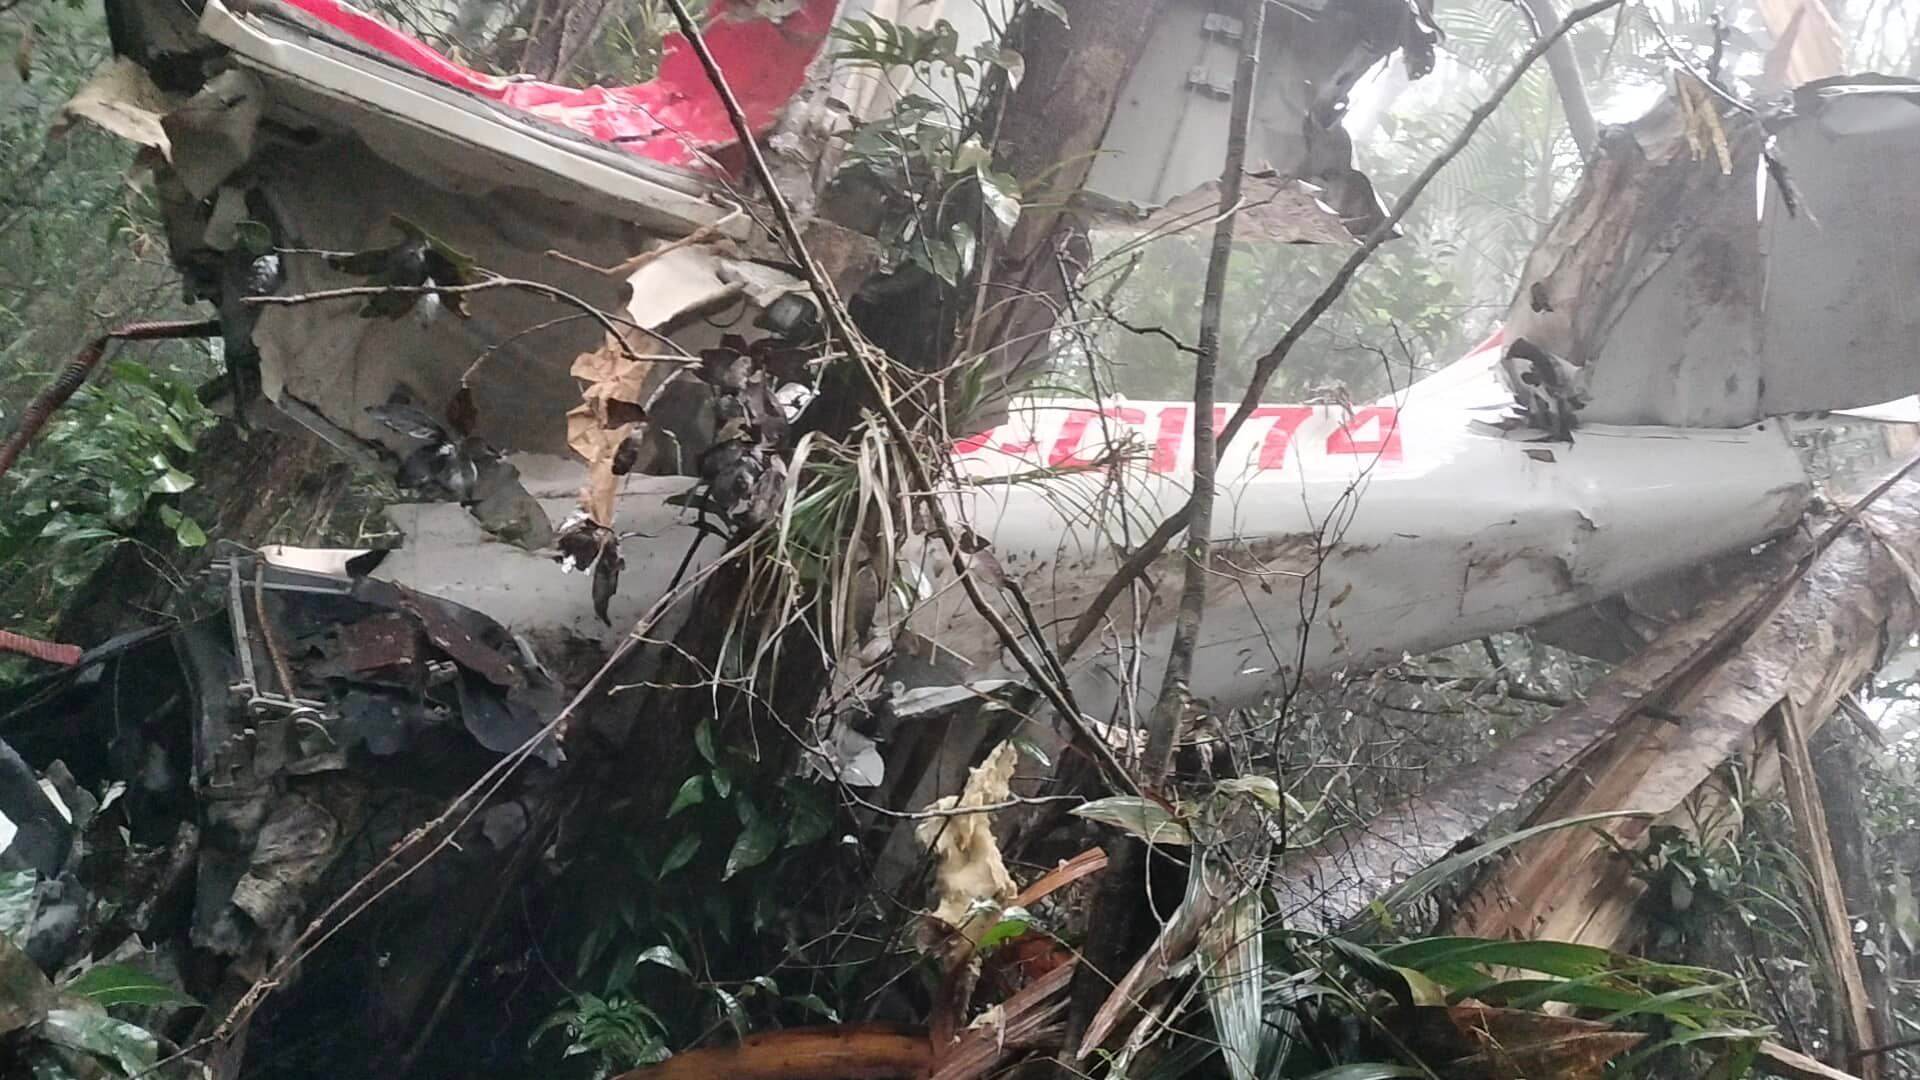 Photos of the wreckage of the Cessna plane that went missing for almost two months were released by the Coast Guard K9 Field Operating Unit on Sunday.